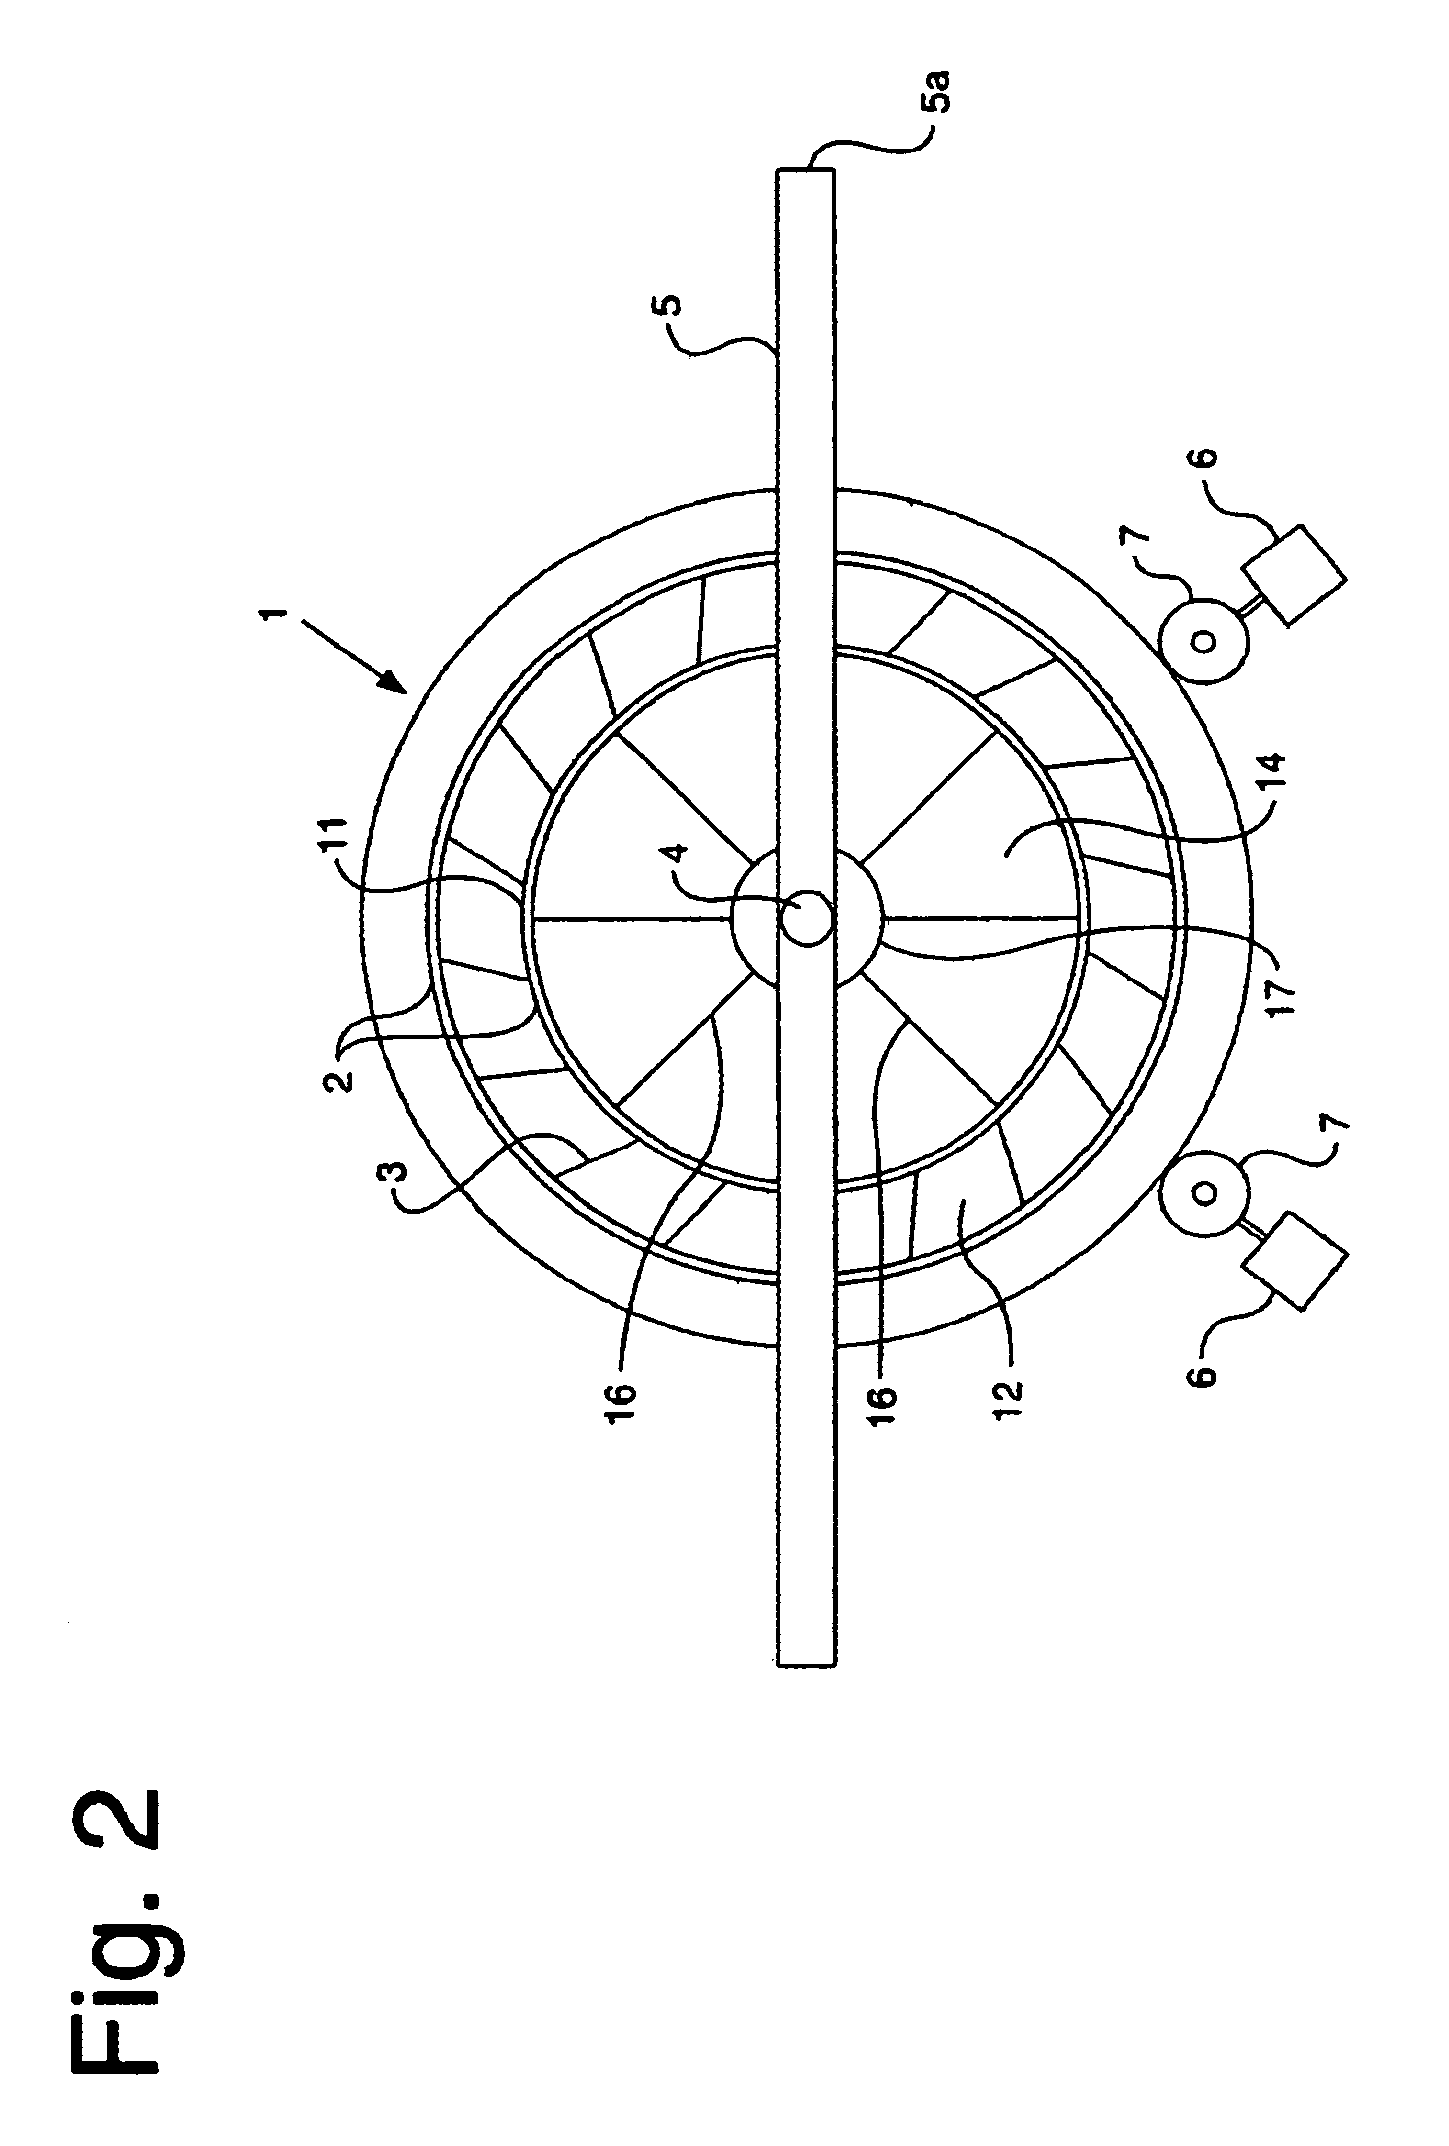 Reduced friction wind turbine apparatus and method